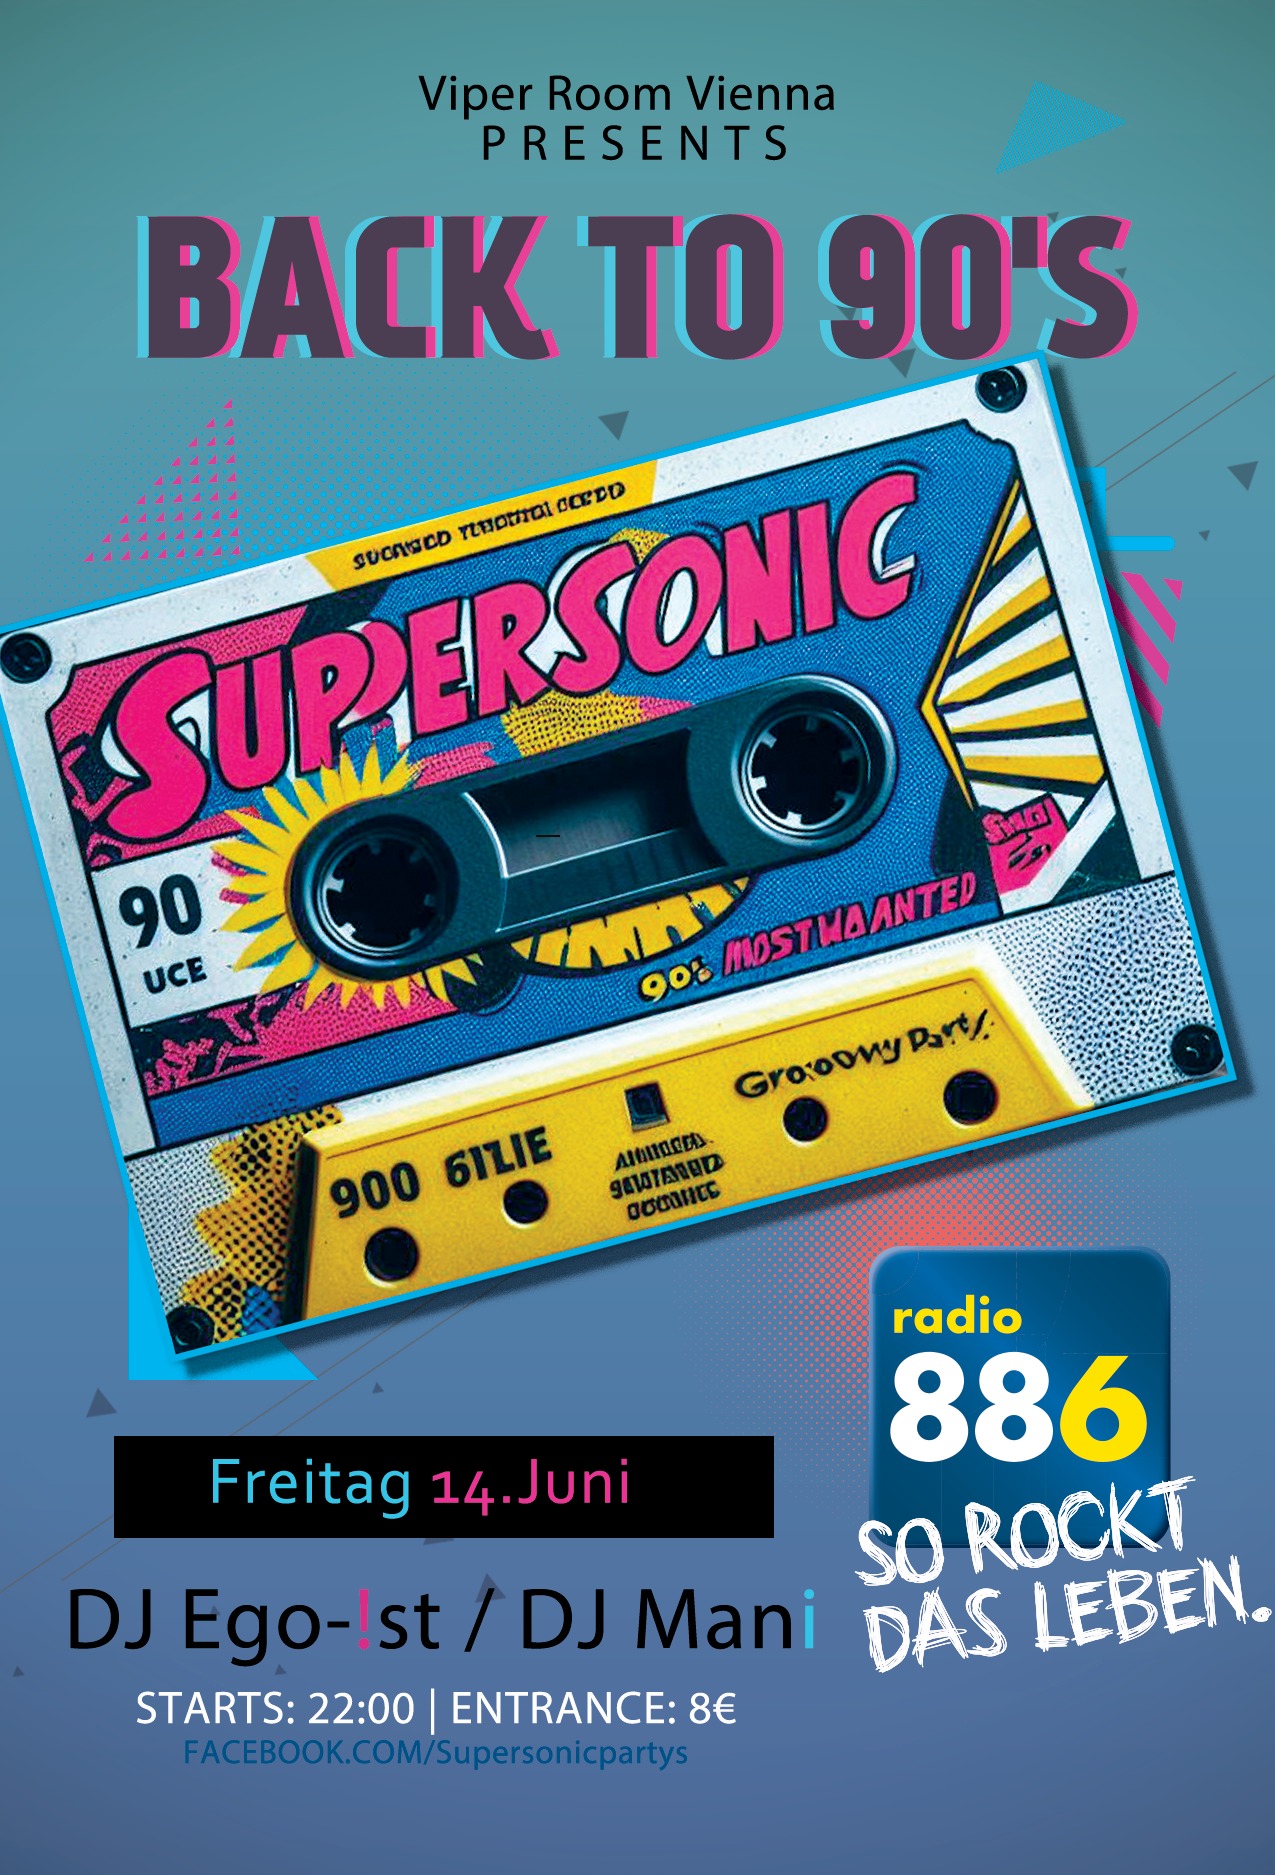 Supersonic - 90s Most Wanted am 14. June 2024 @ Viper Room.